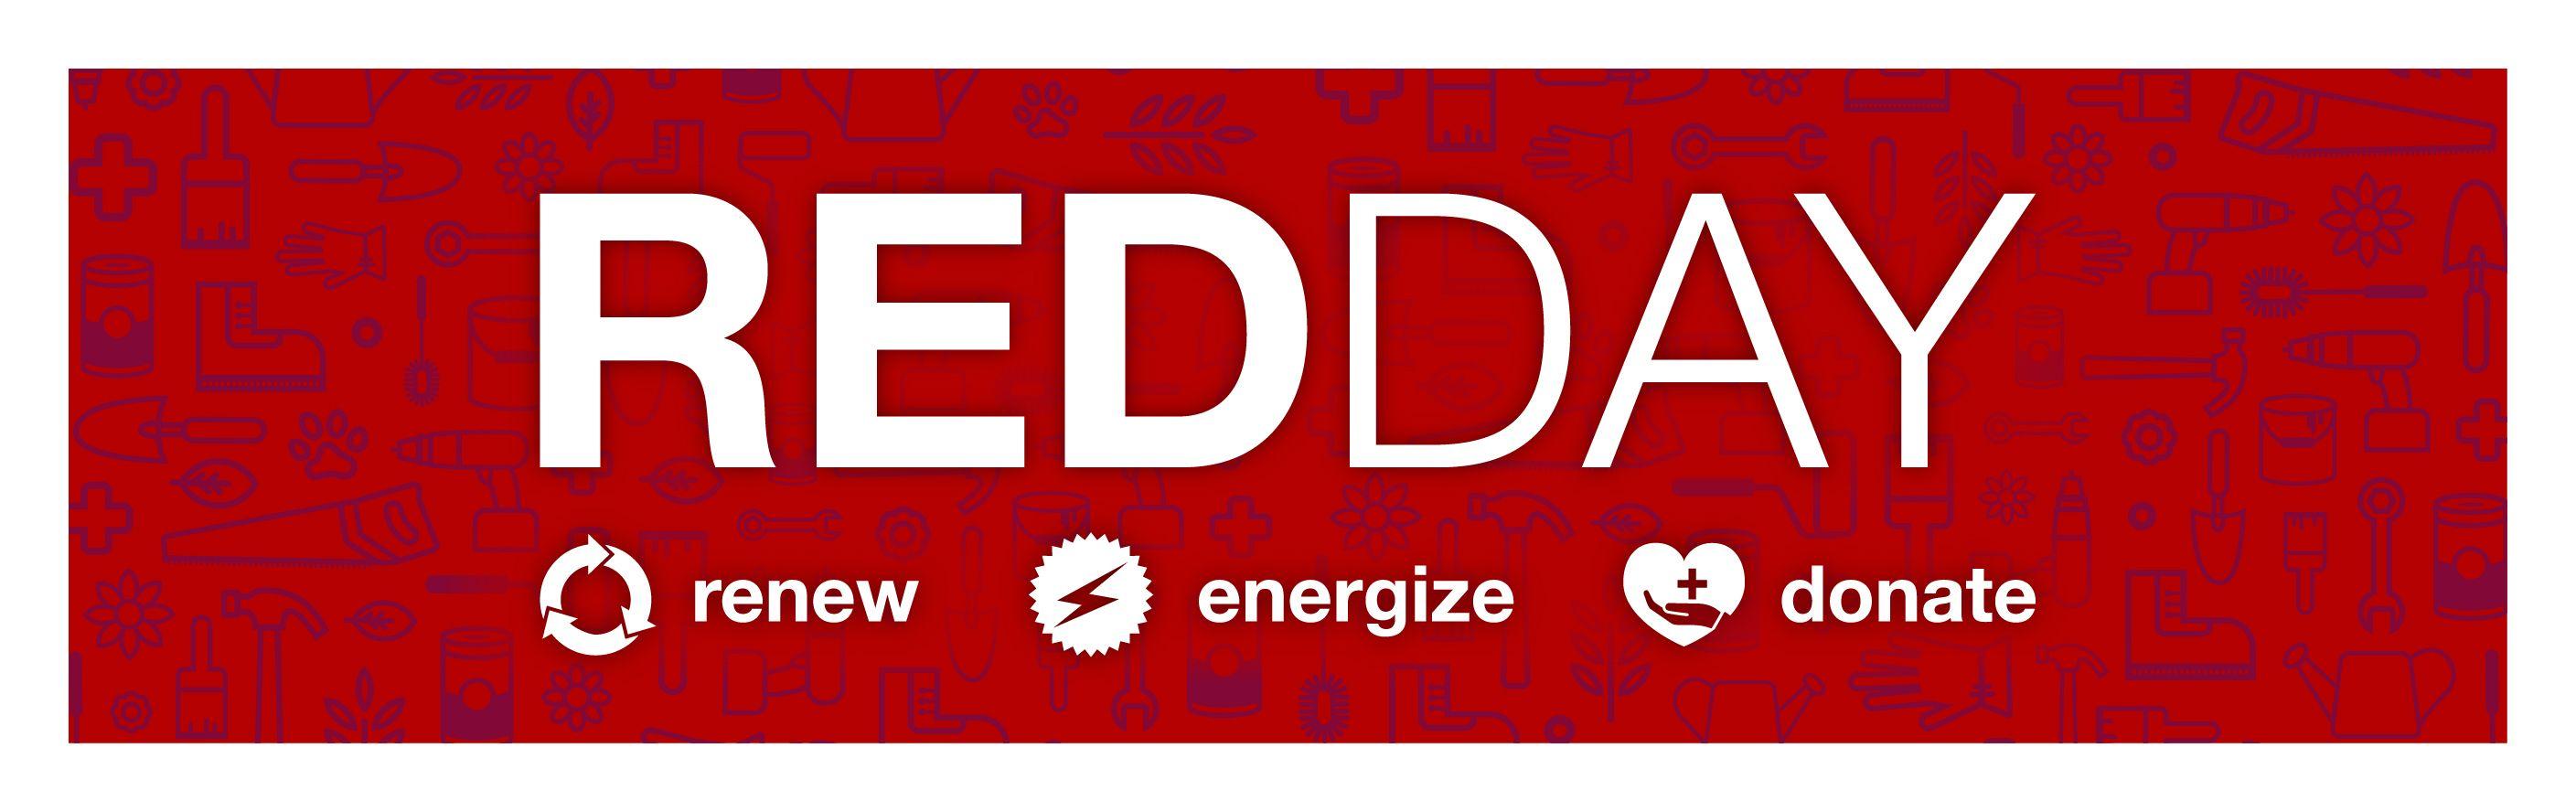 Red Day Logo - Keller Williams Realty Red Day is May 8th! Here's what the Greater